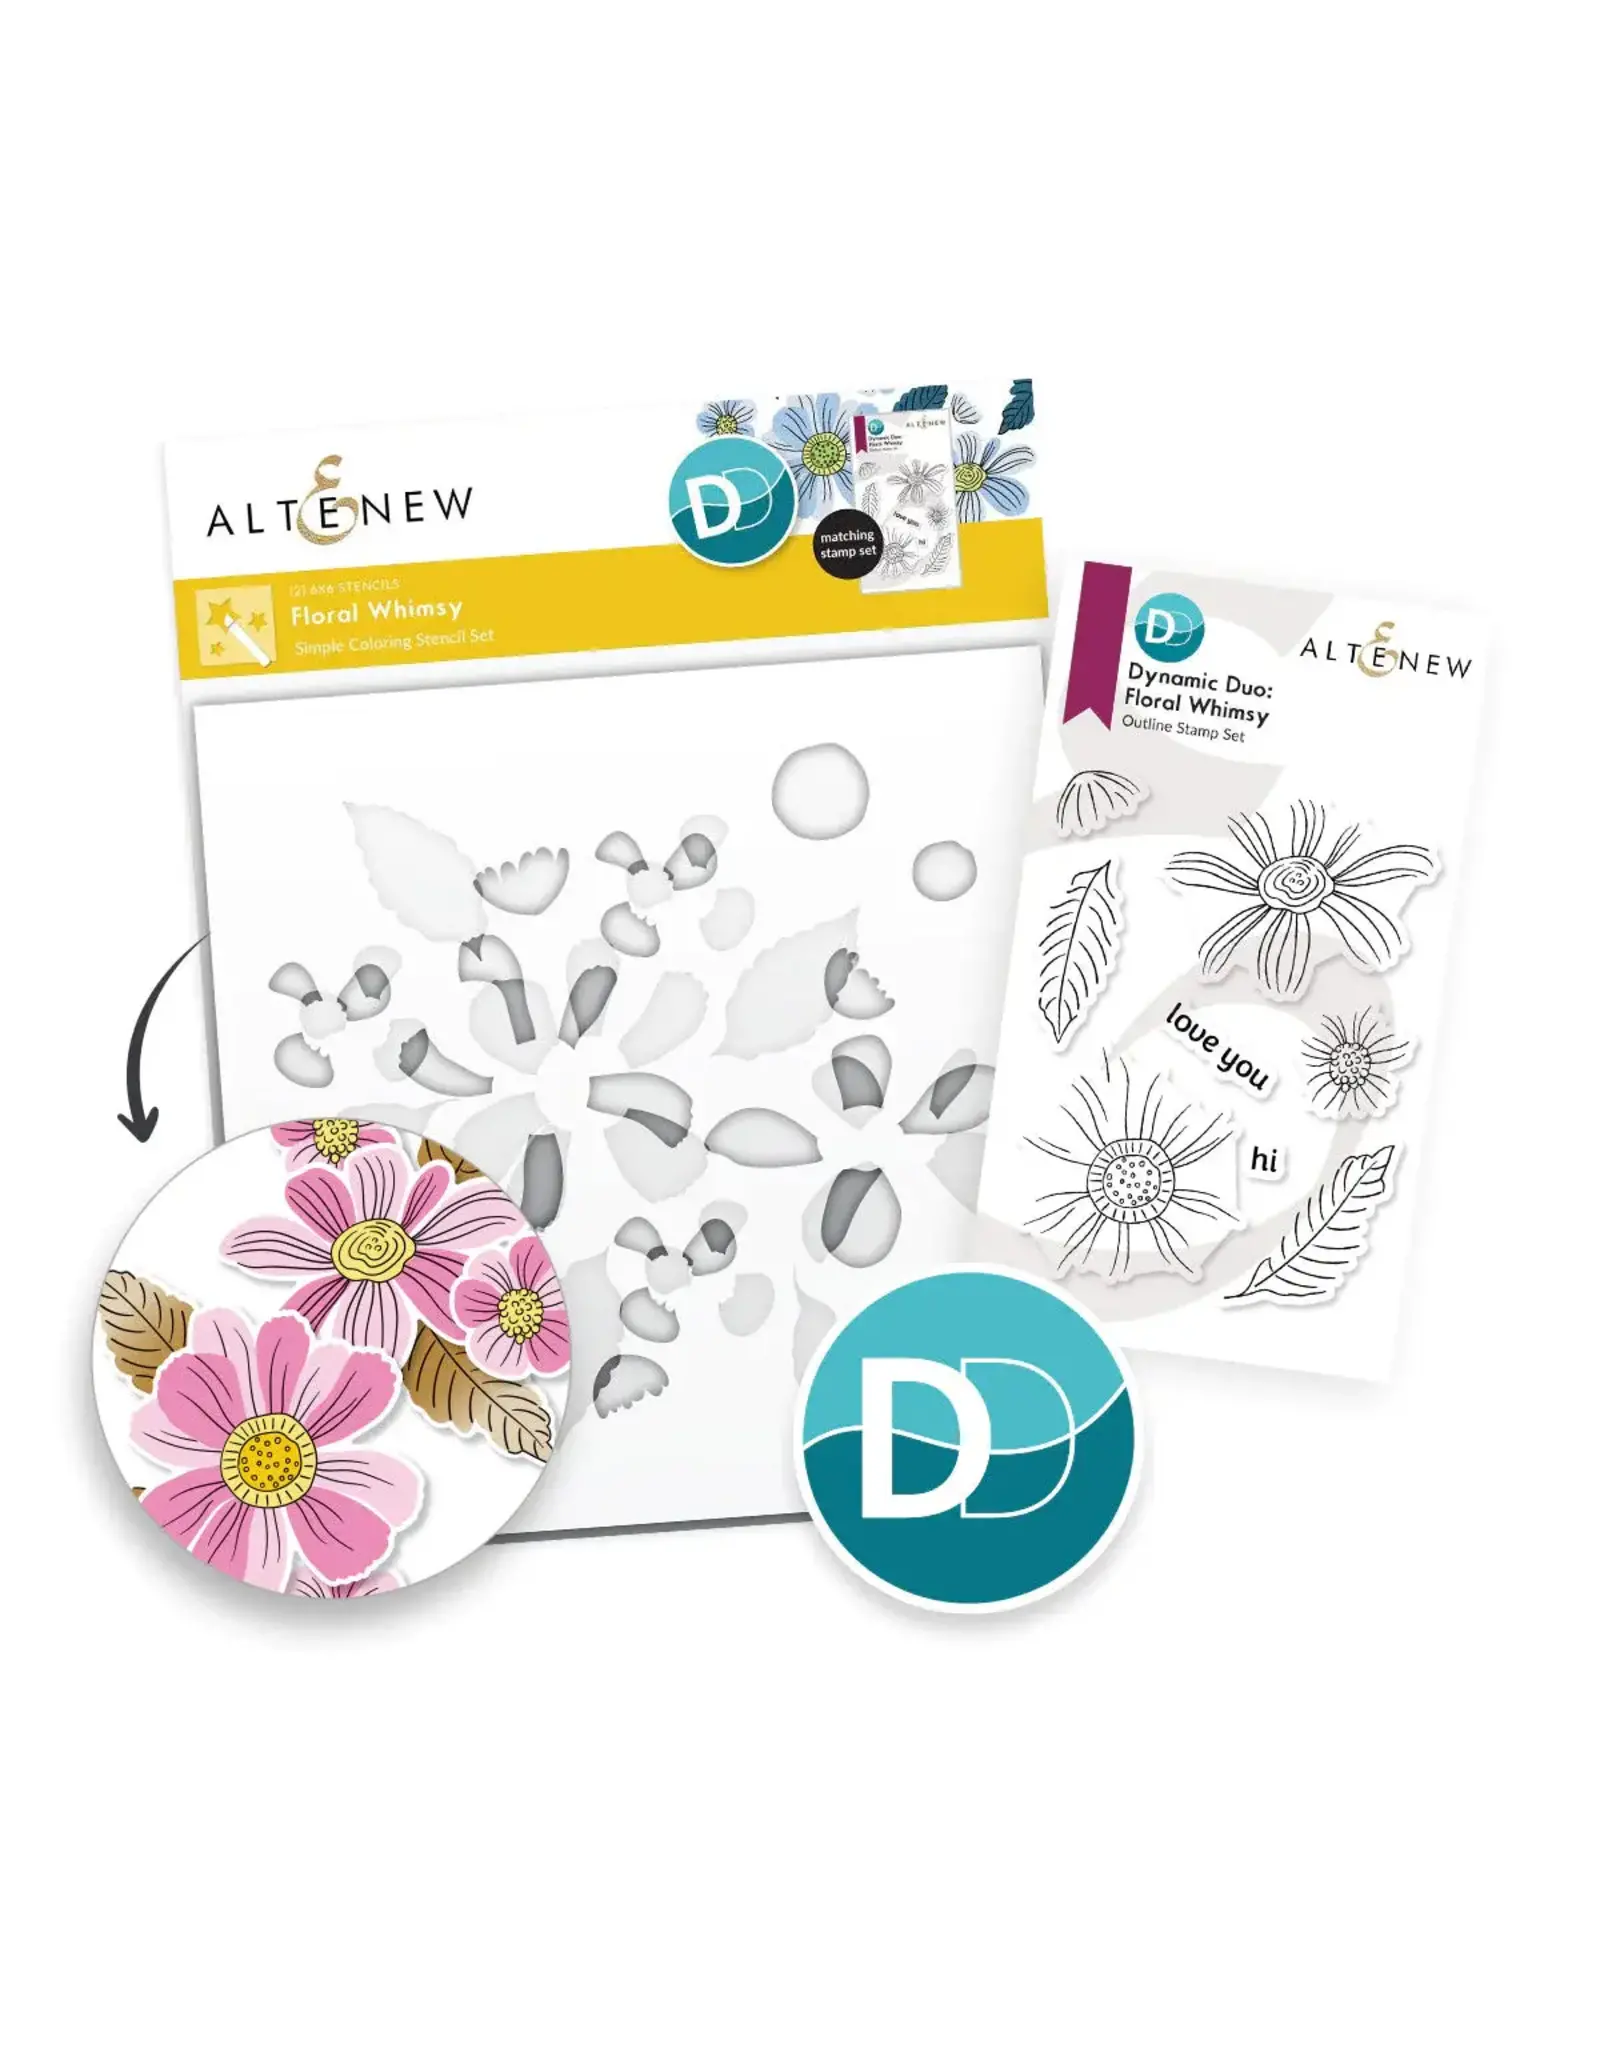 ALTENEW ALTENEW DYNAMIC DUO: FLORAL WHIMSY OUTLINE CLEAR STAMP AND STENCIL SET